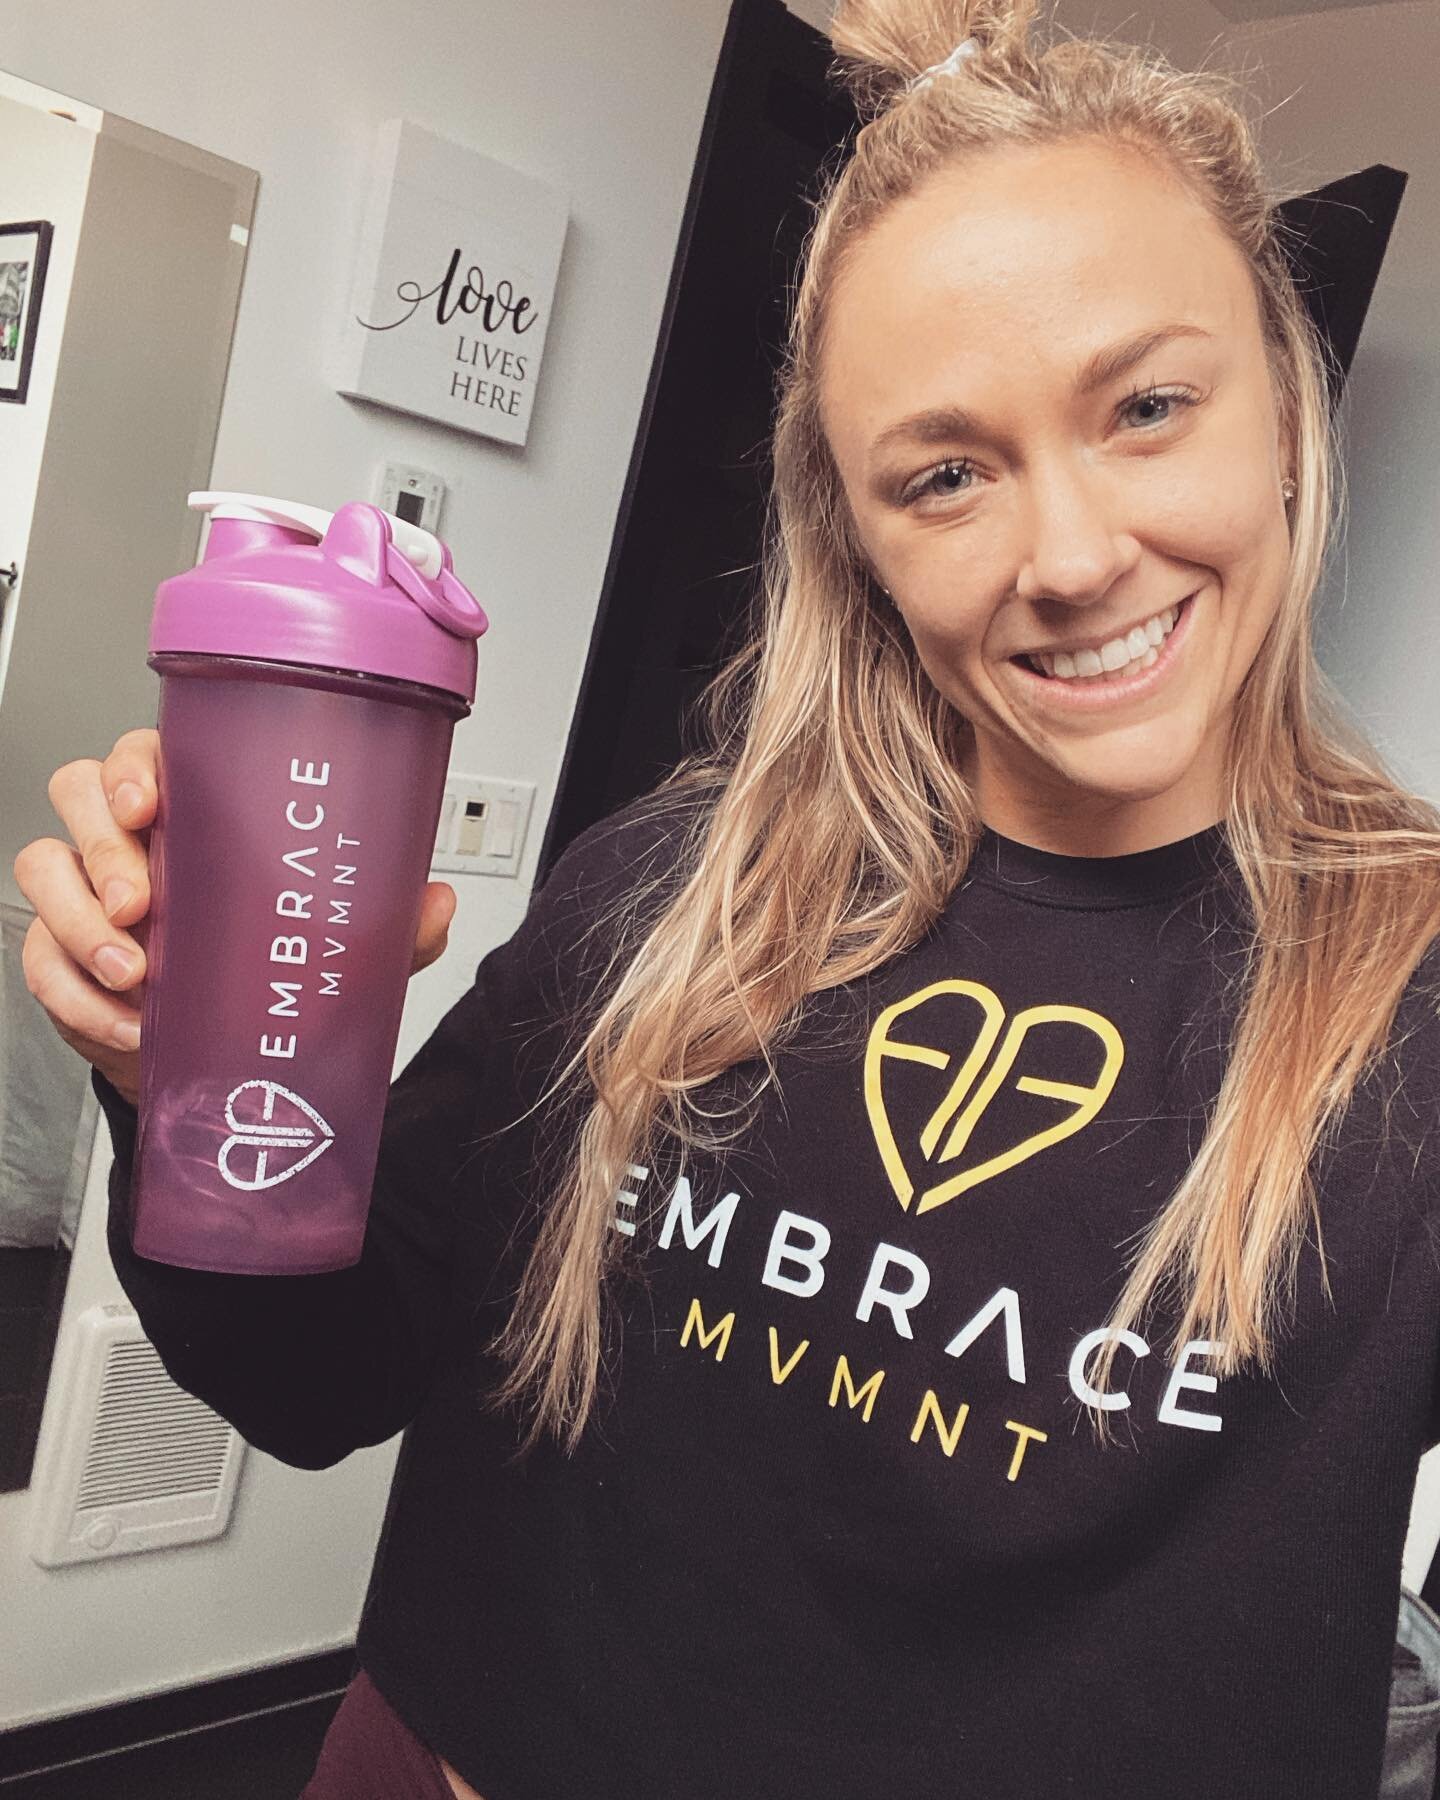 I am SO excited to get this sweet swag in the mail from @ager_bomb  and  @embracemvmnt 😍

I have been a big fan of Andrea since her competitive CrossFit days, and now as a new mom and founder of this amazing fitness company, I am even more honored t